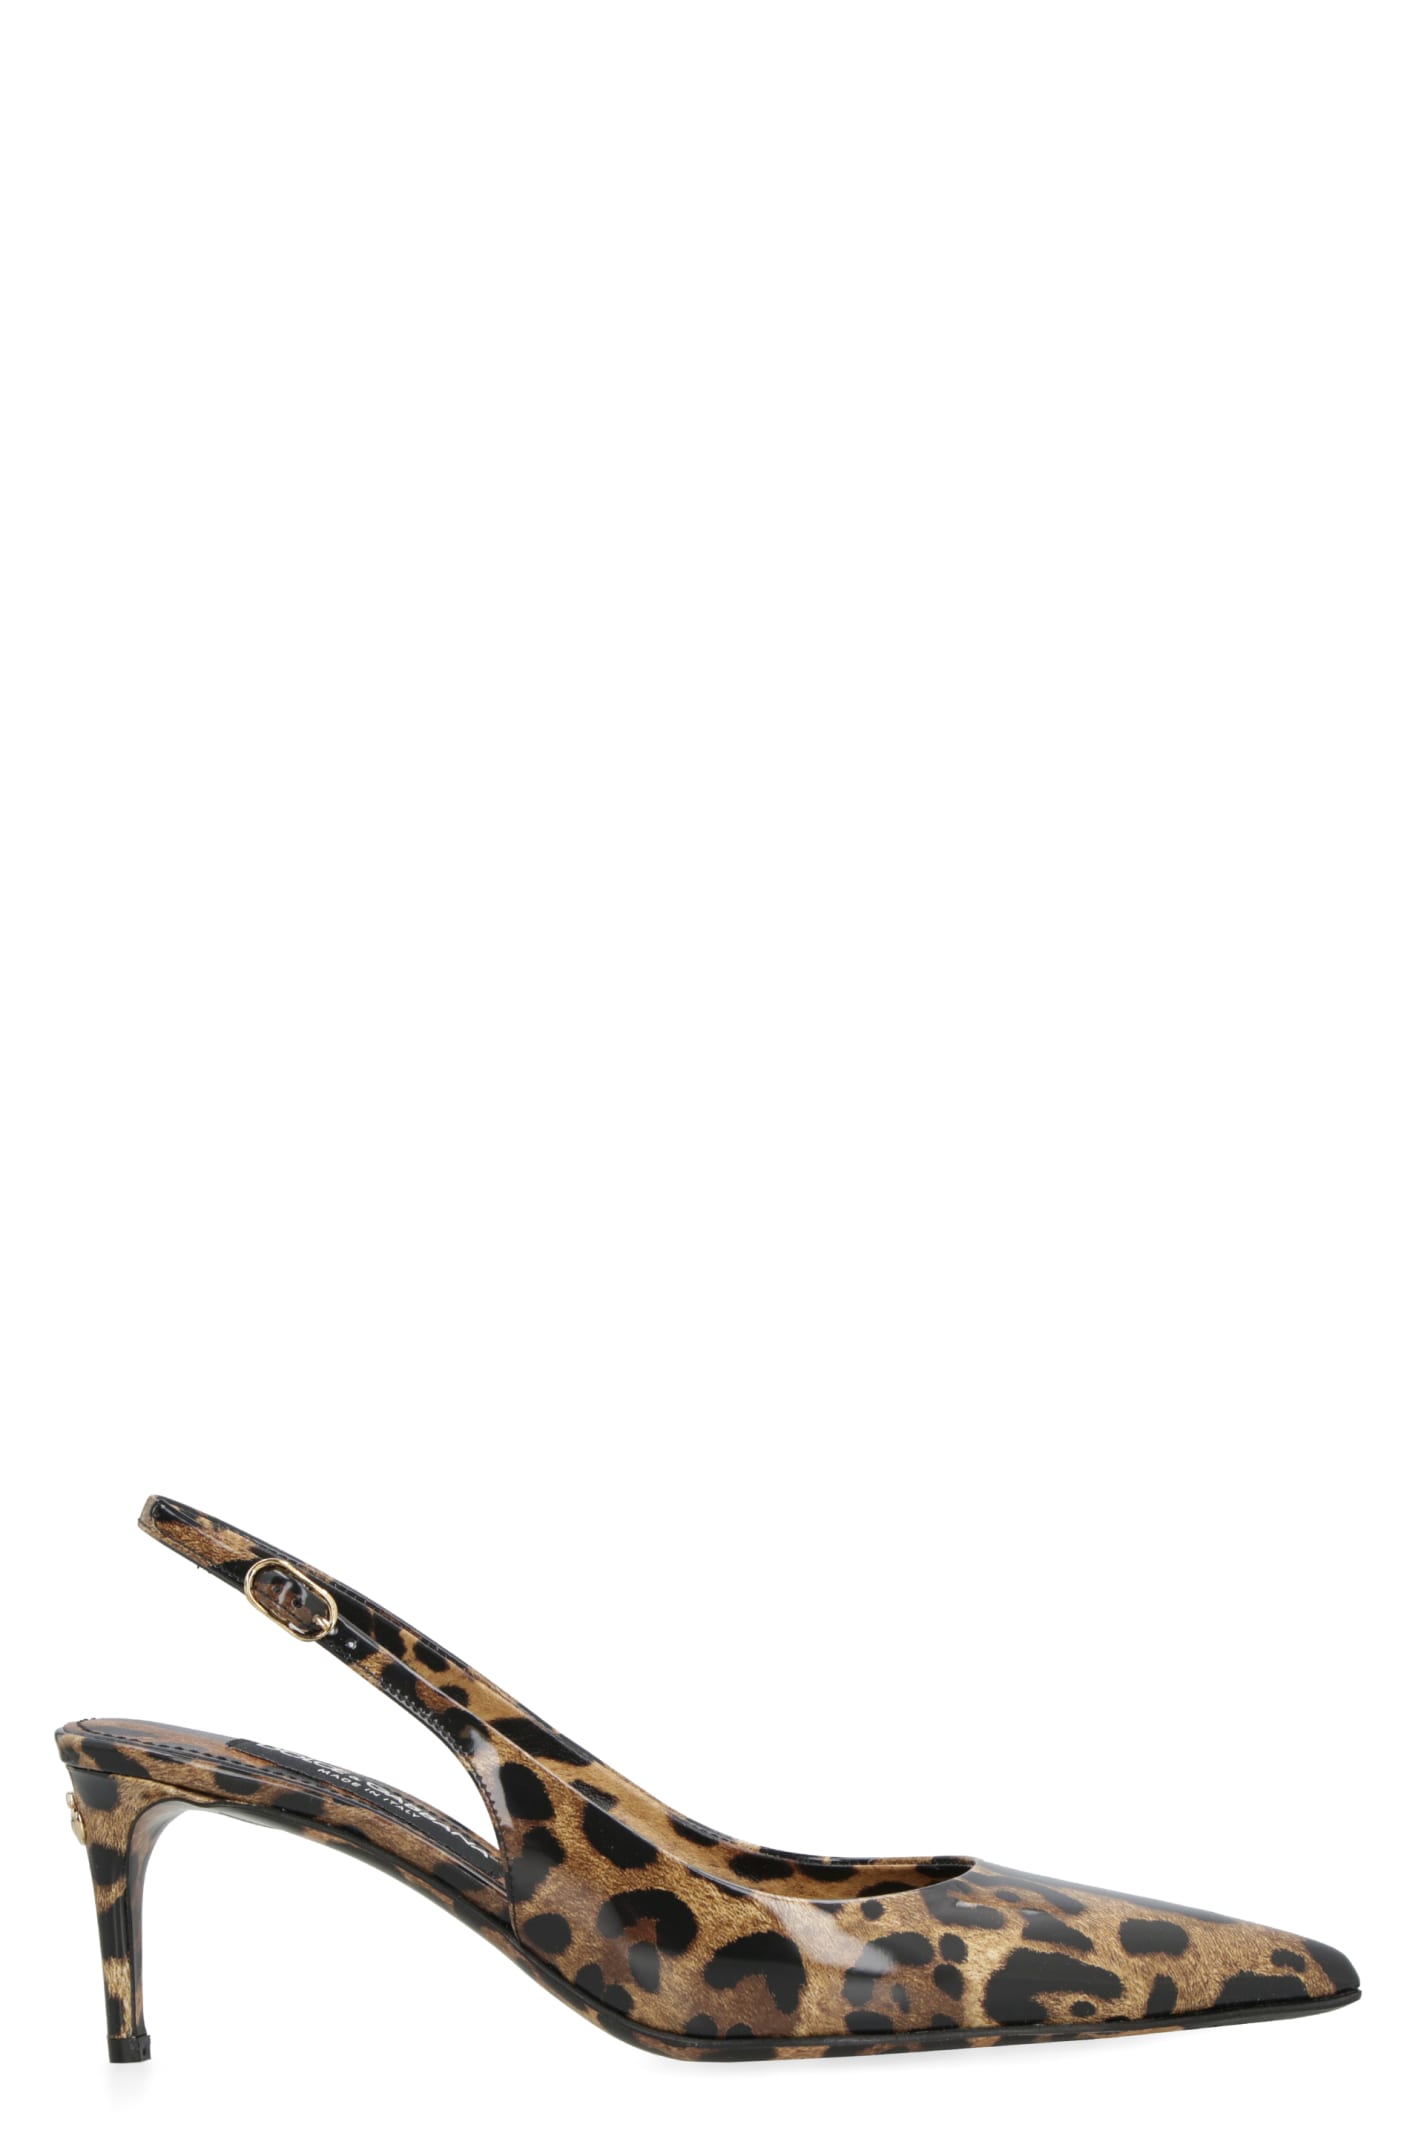 Dolce & Gabbana Lollo Leather Slingback Pumps In Brown